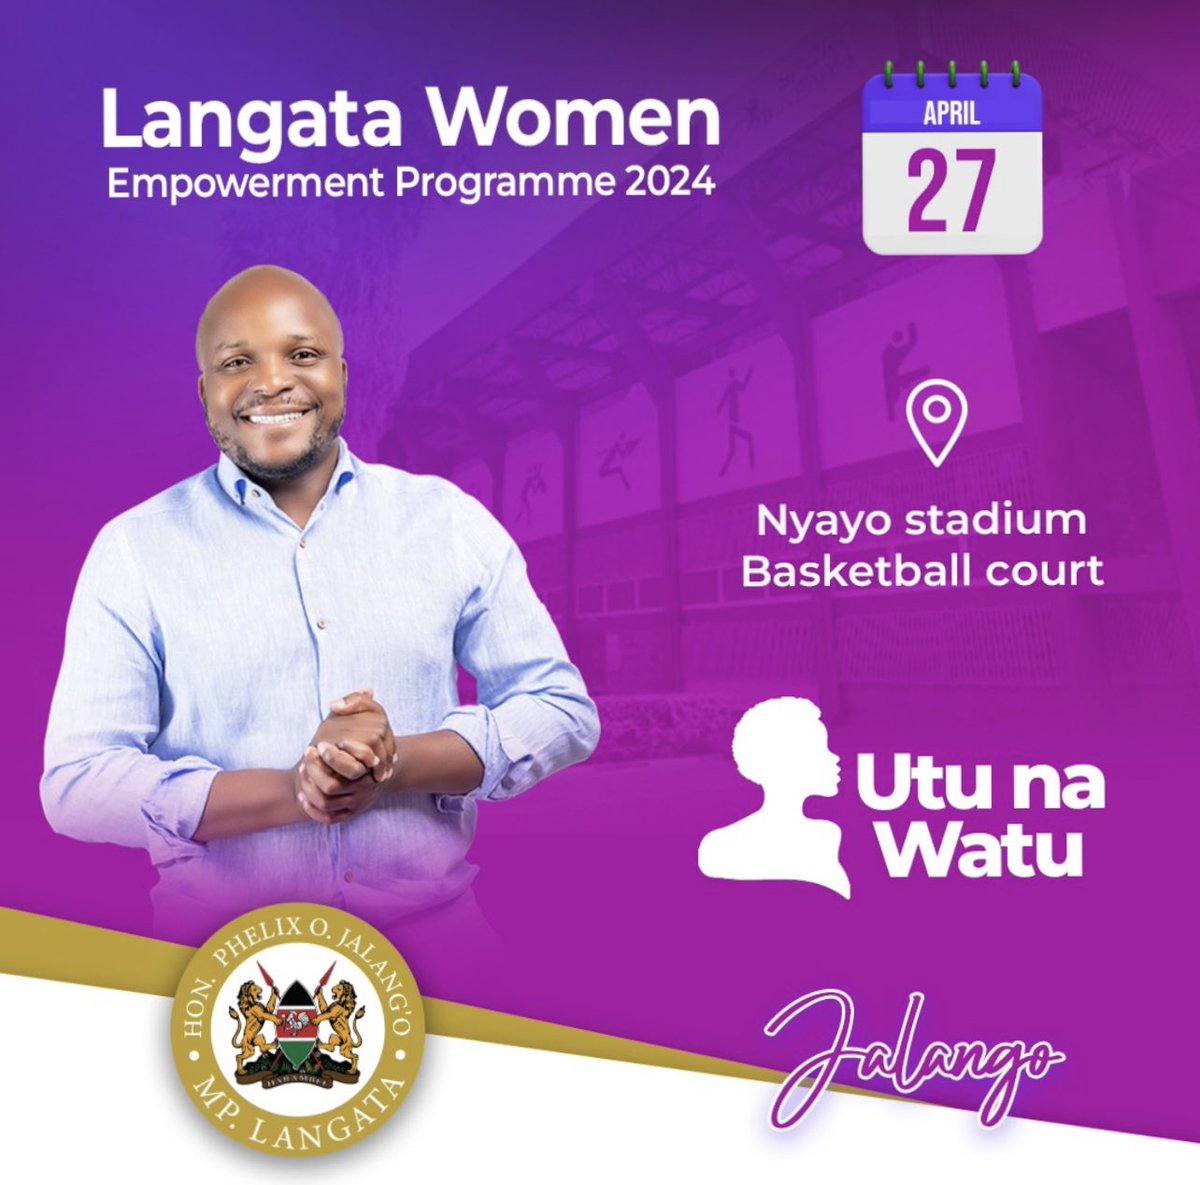 This weekend 27th April we do it for our mothers, an empowerment program for our women groups. A women summit of its kind! #Langata1